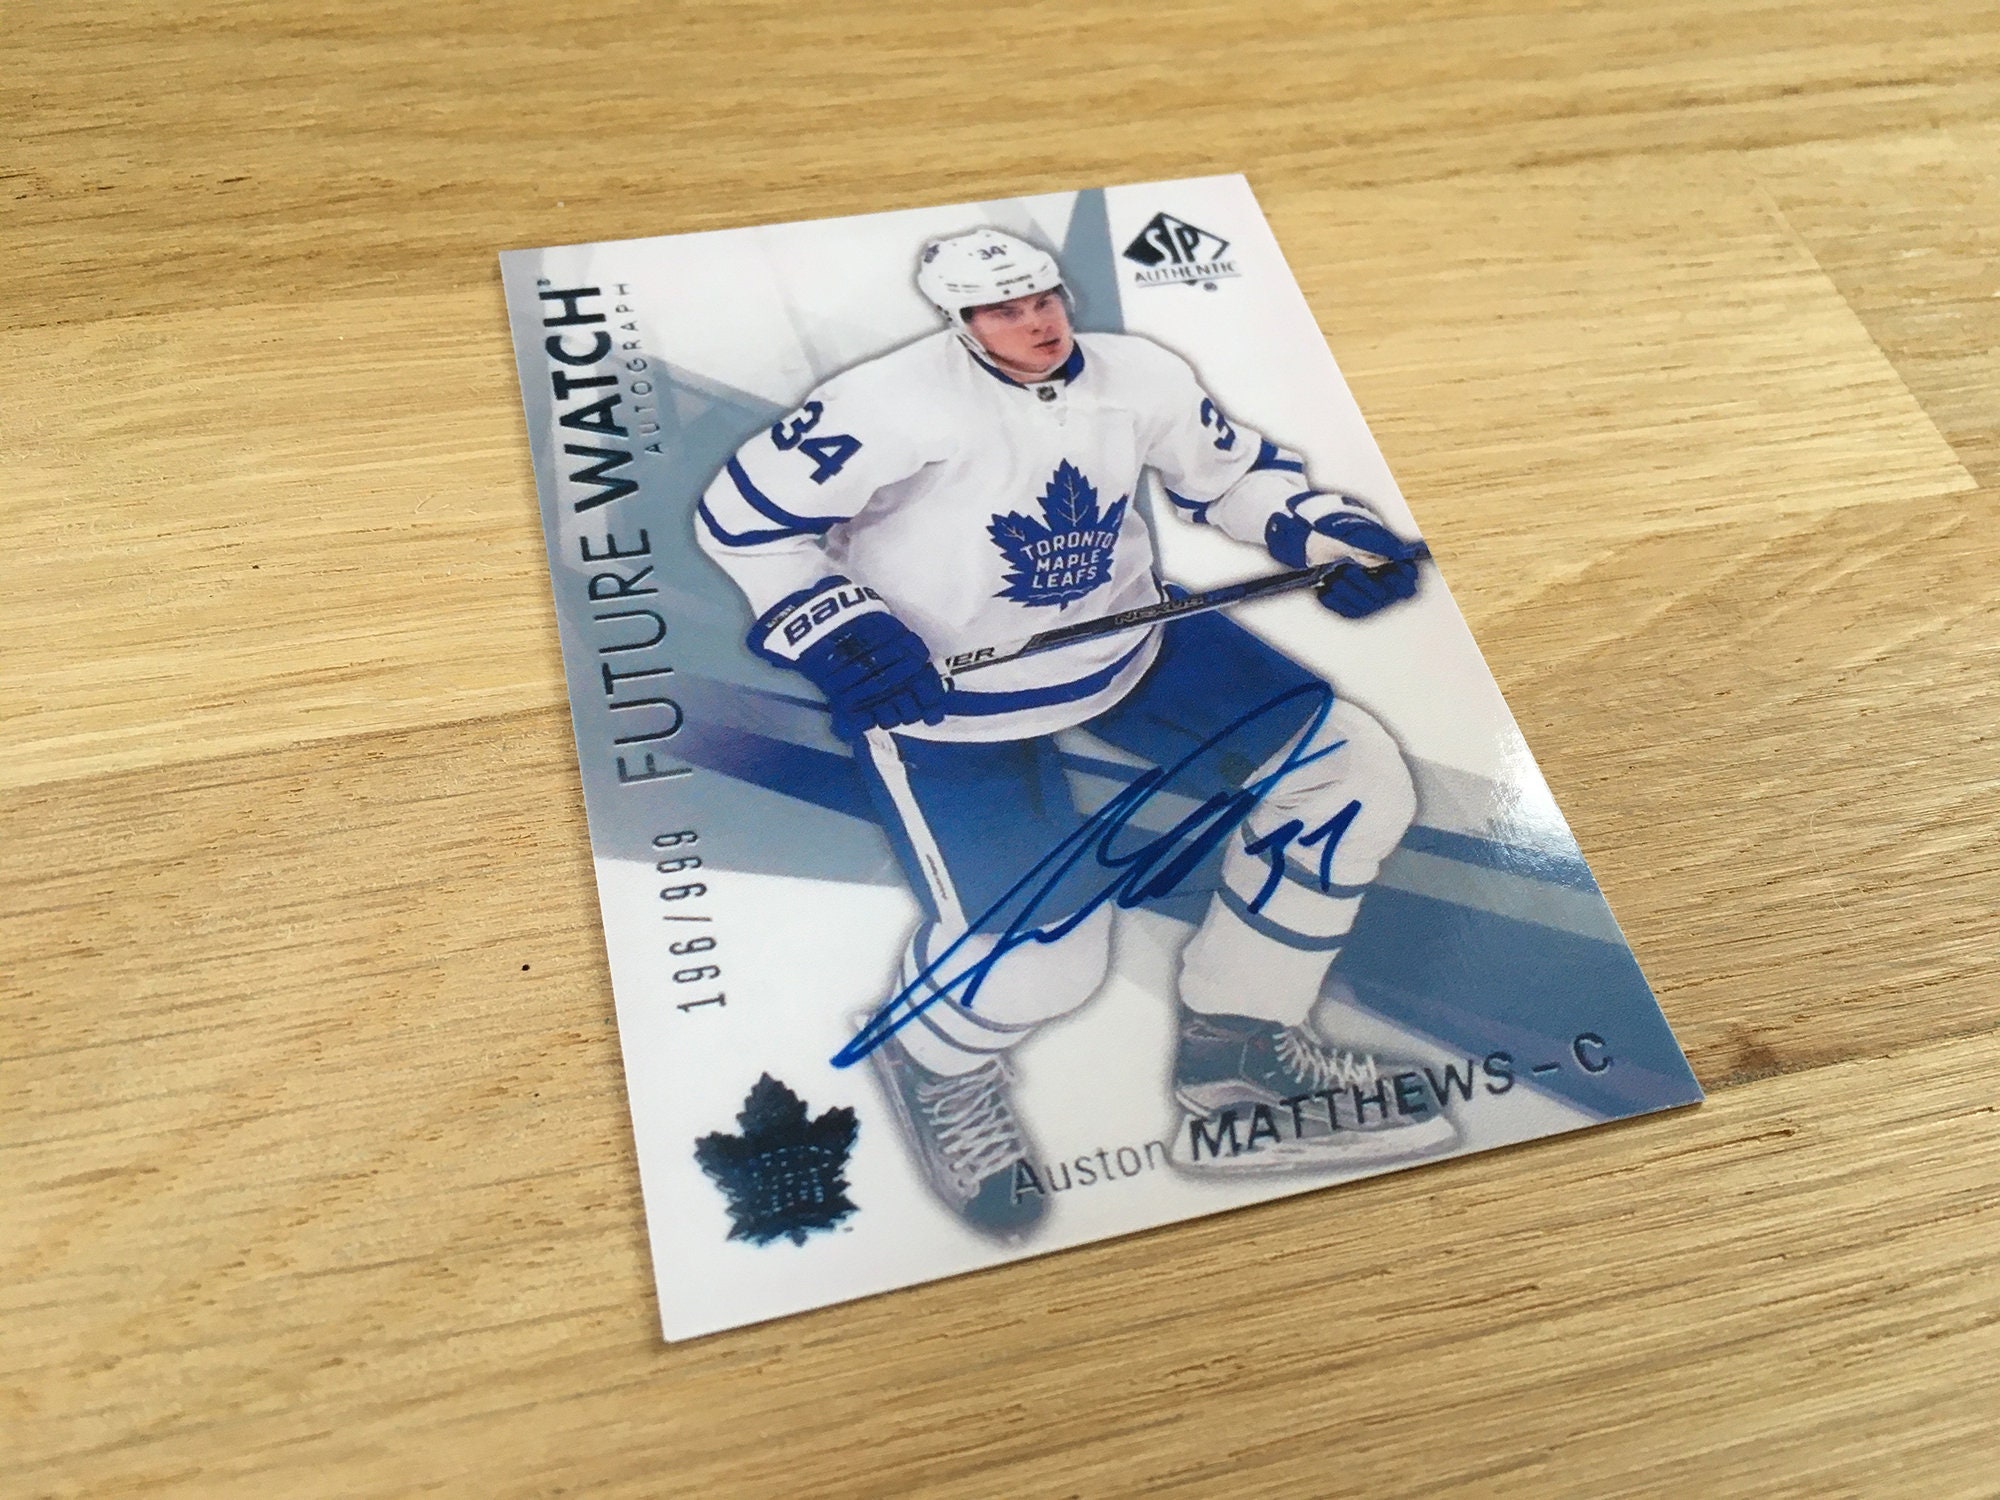 Toronto Maple Leafs on X: We have an autographed Auston Matthews